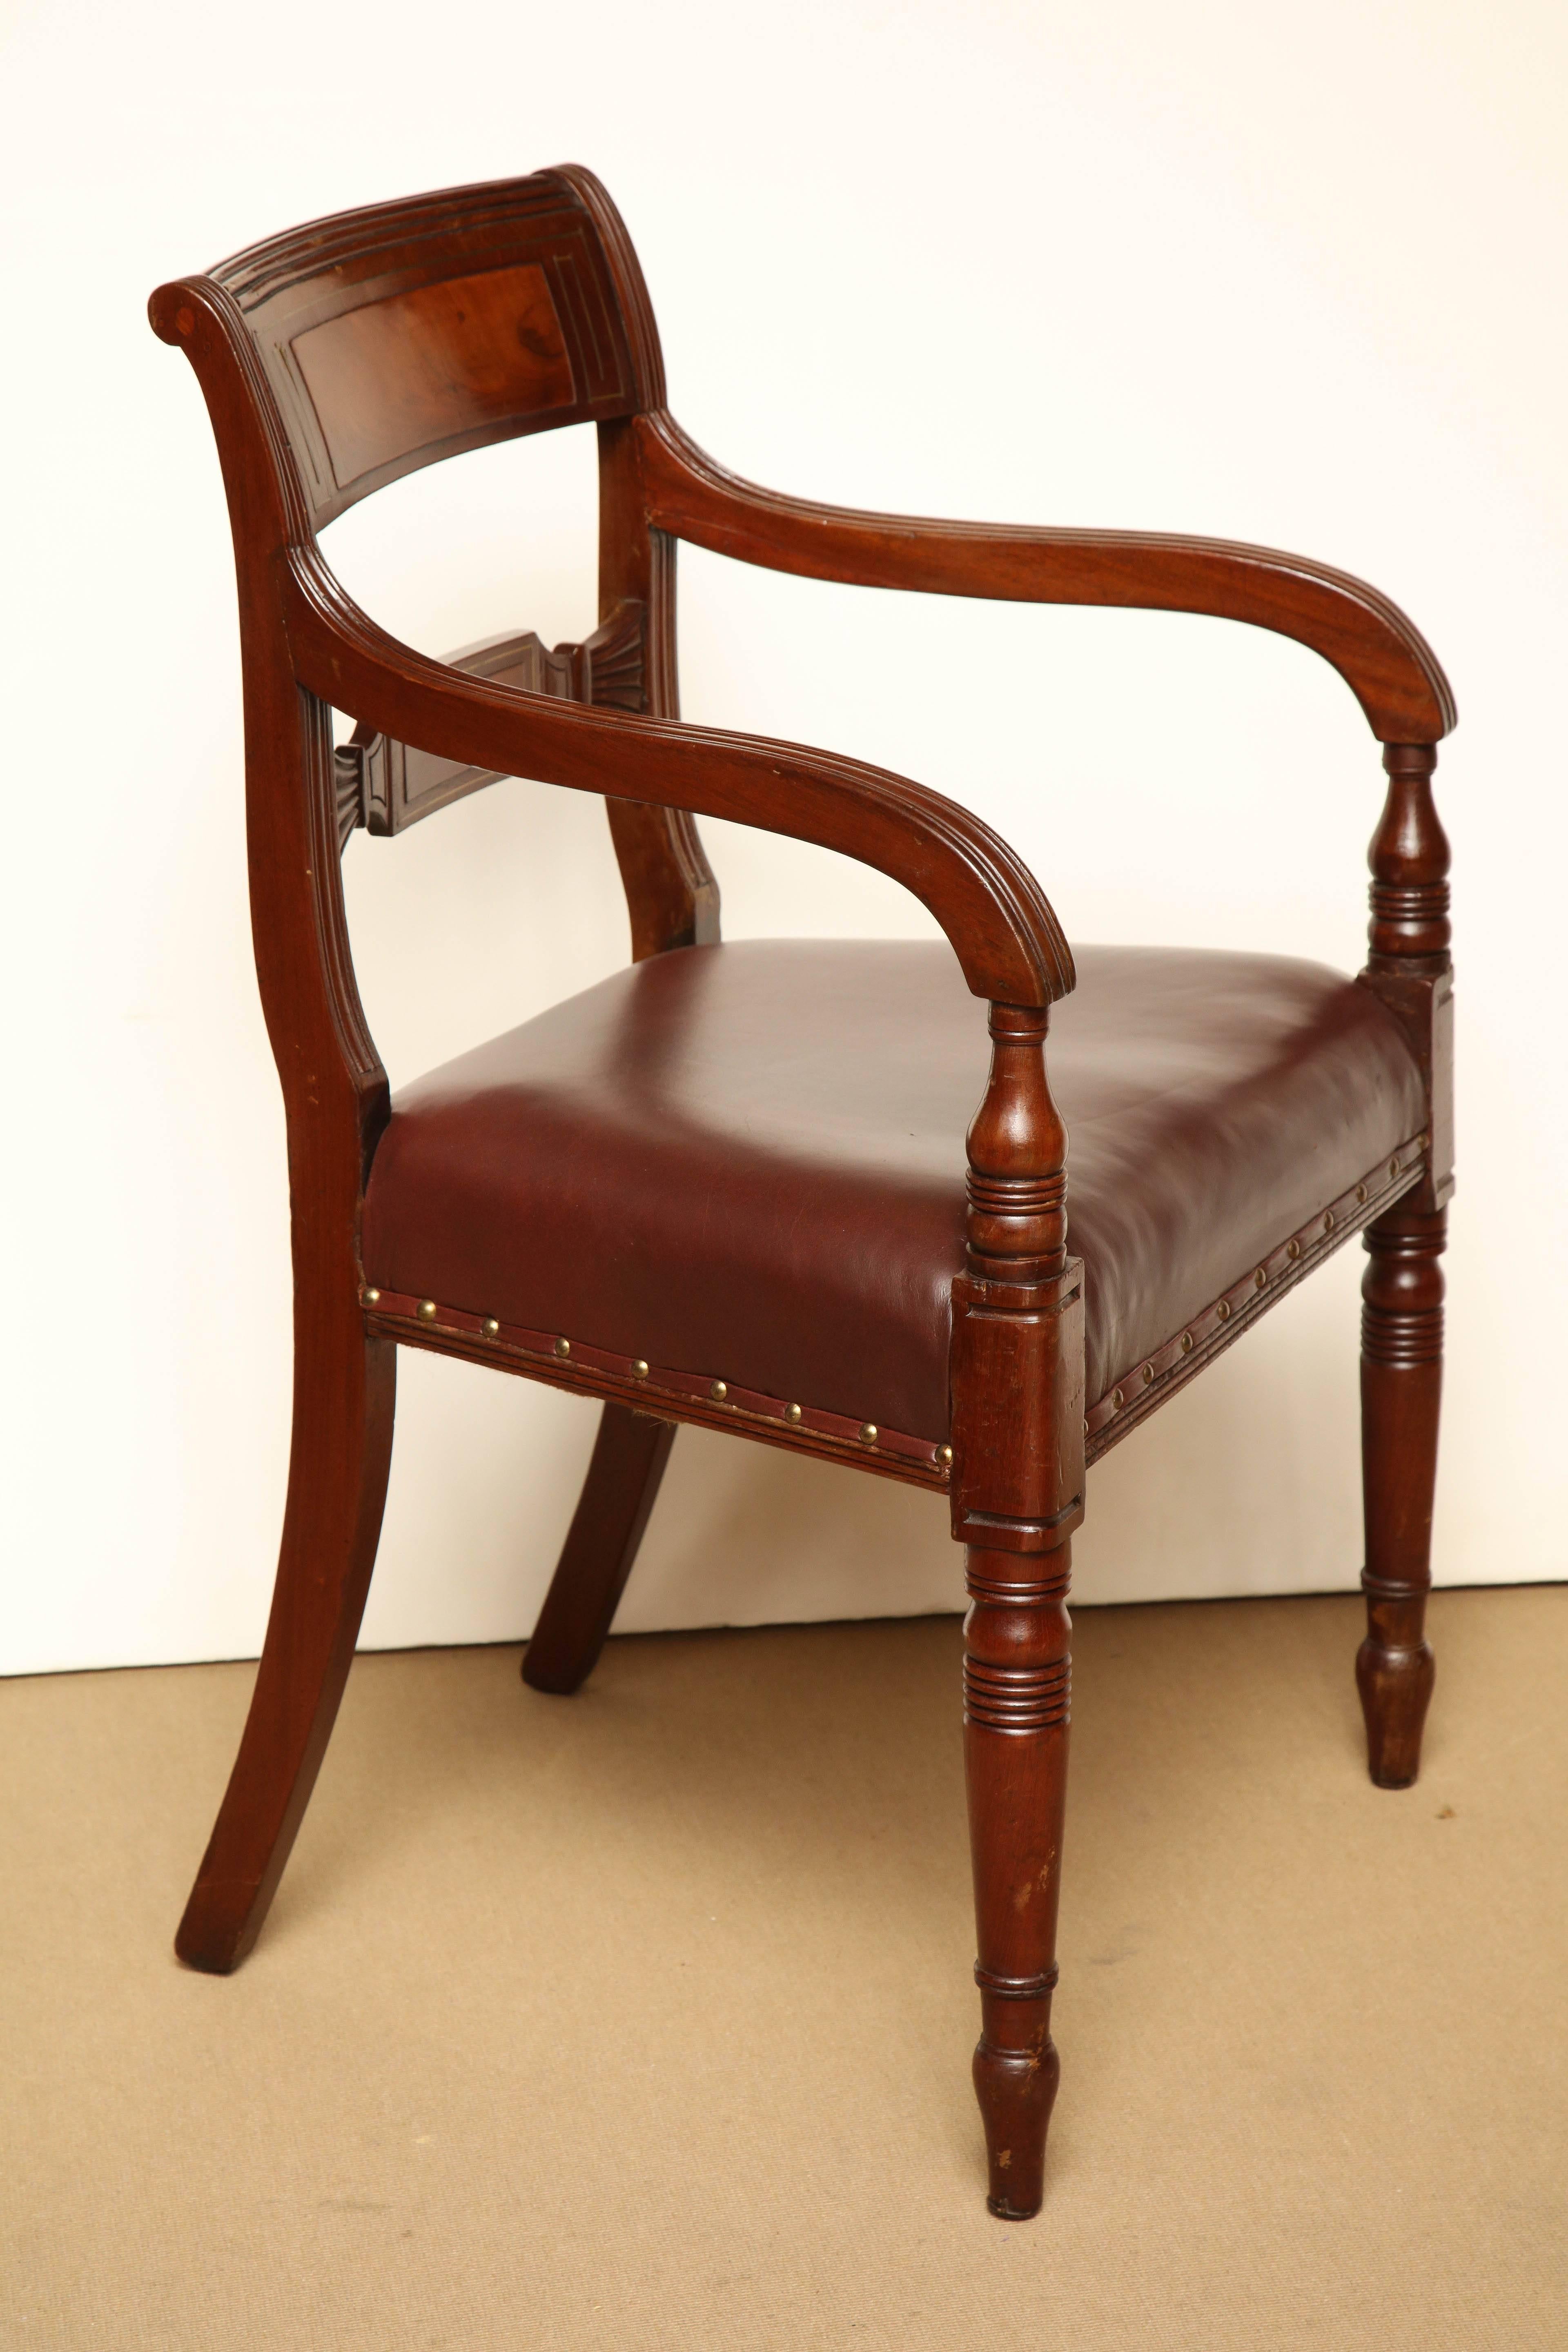 Early 19th Century English Regency, Mahogany and Brass Inlay Desk Chair For Sale 1